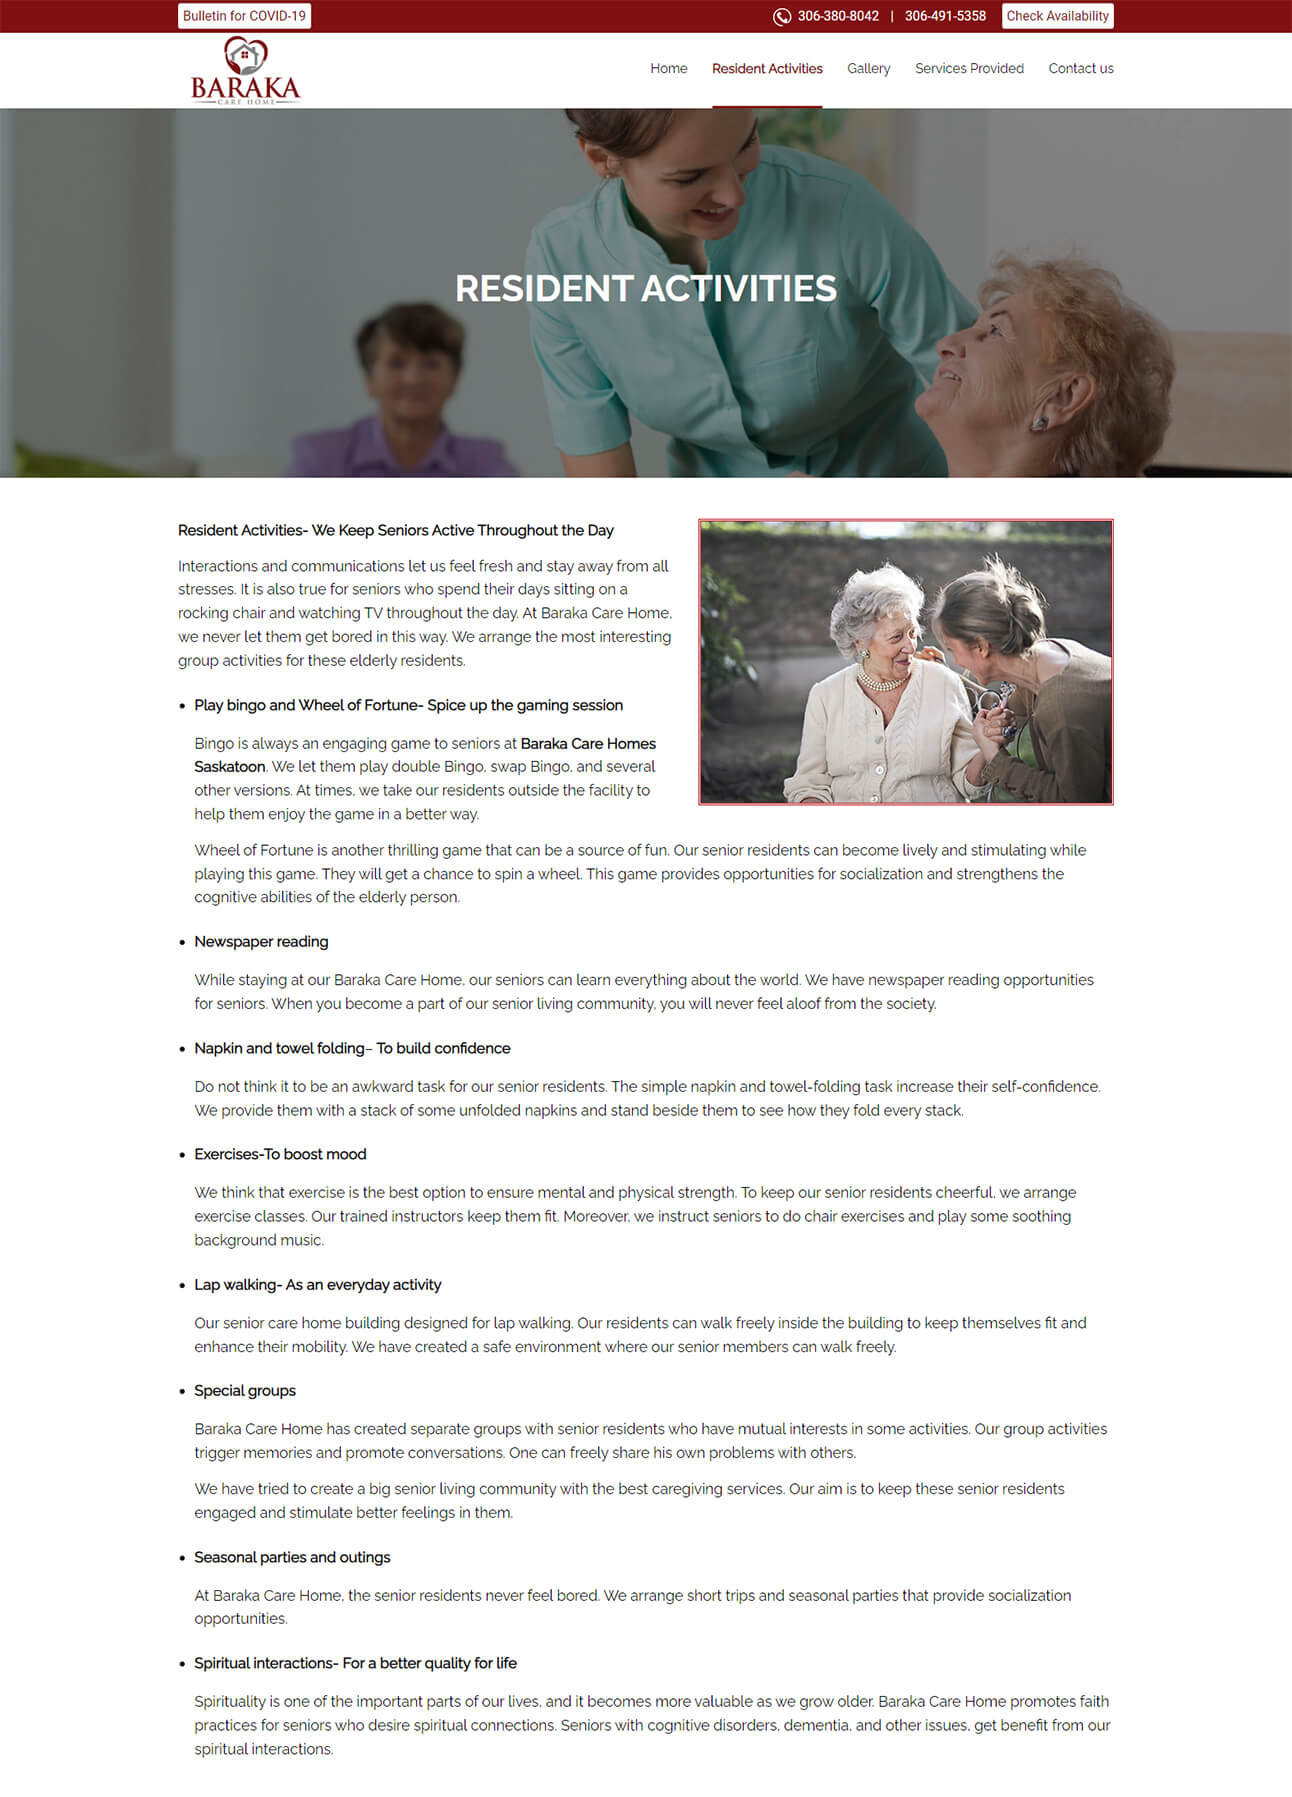 resident activities page